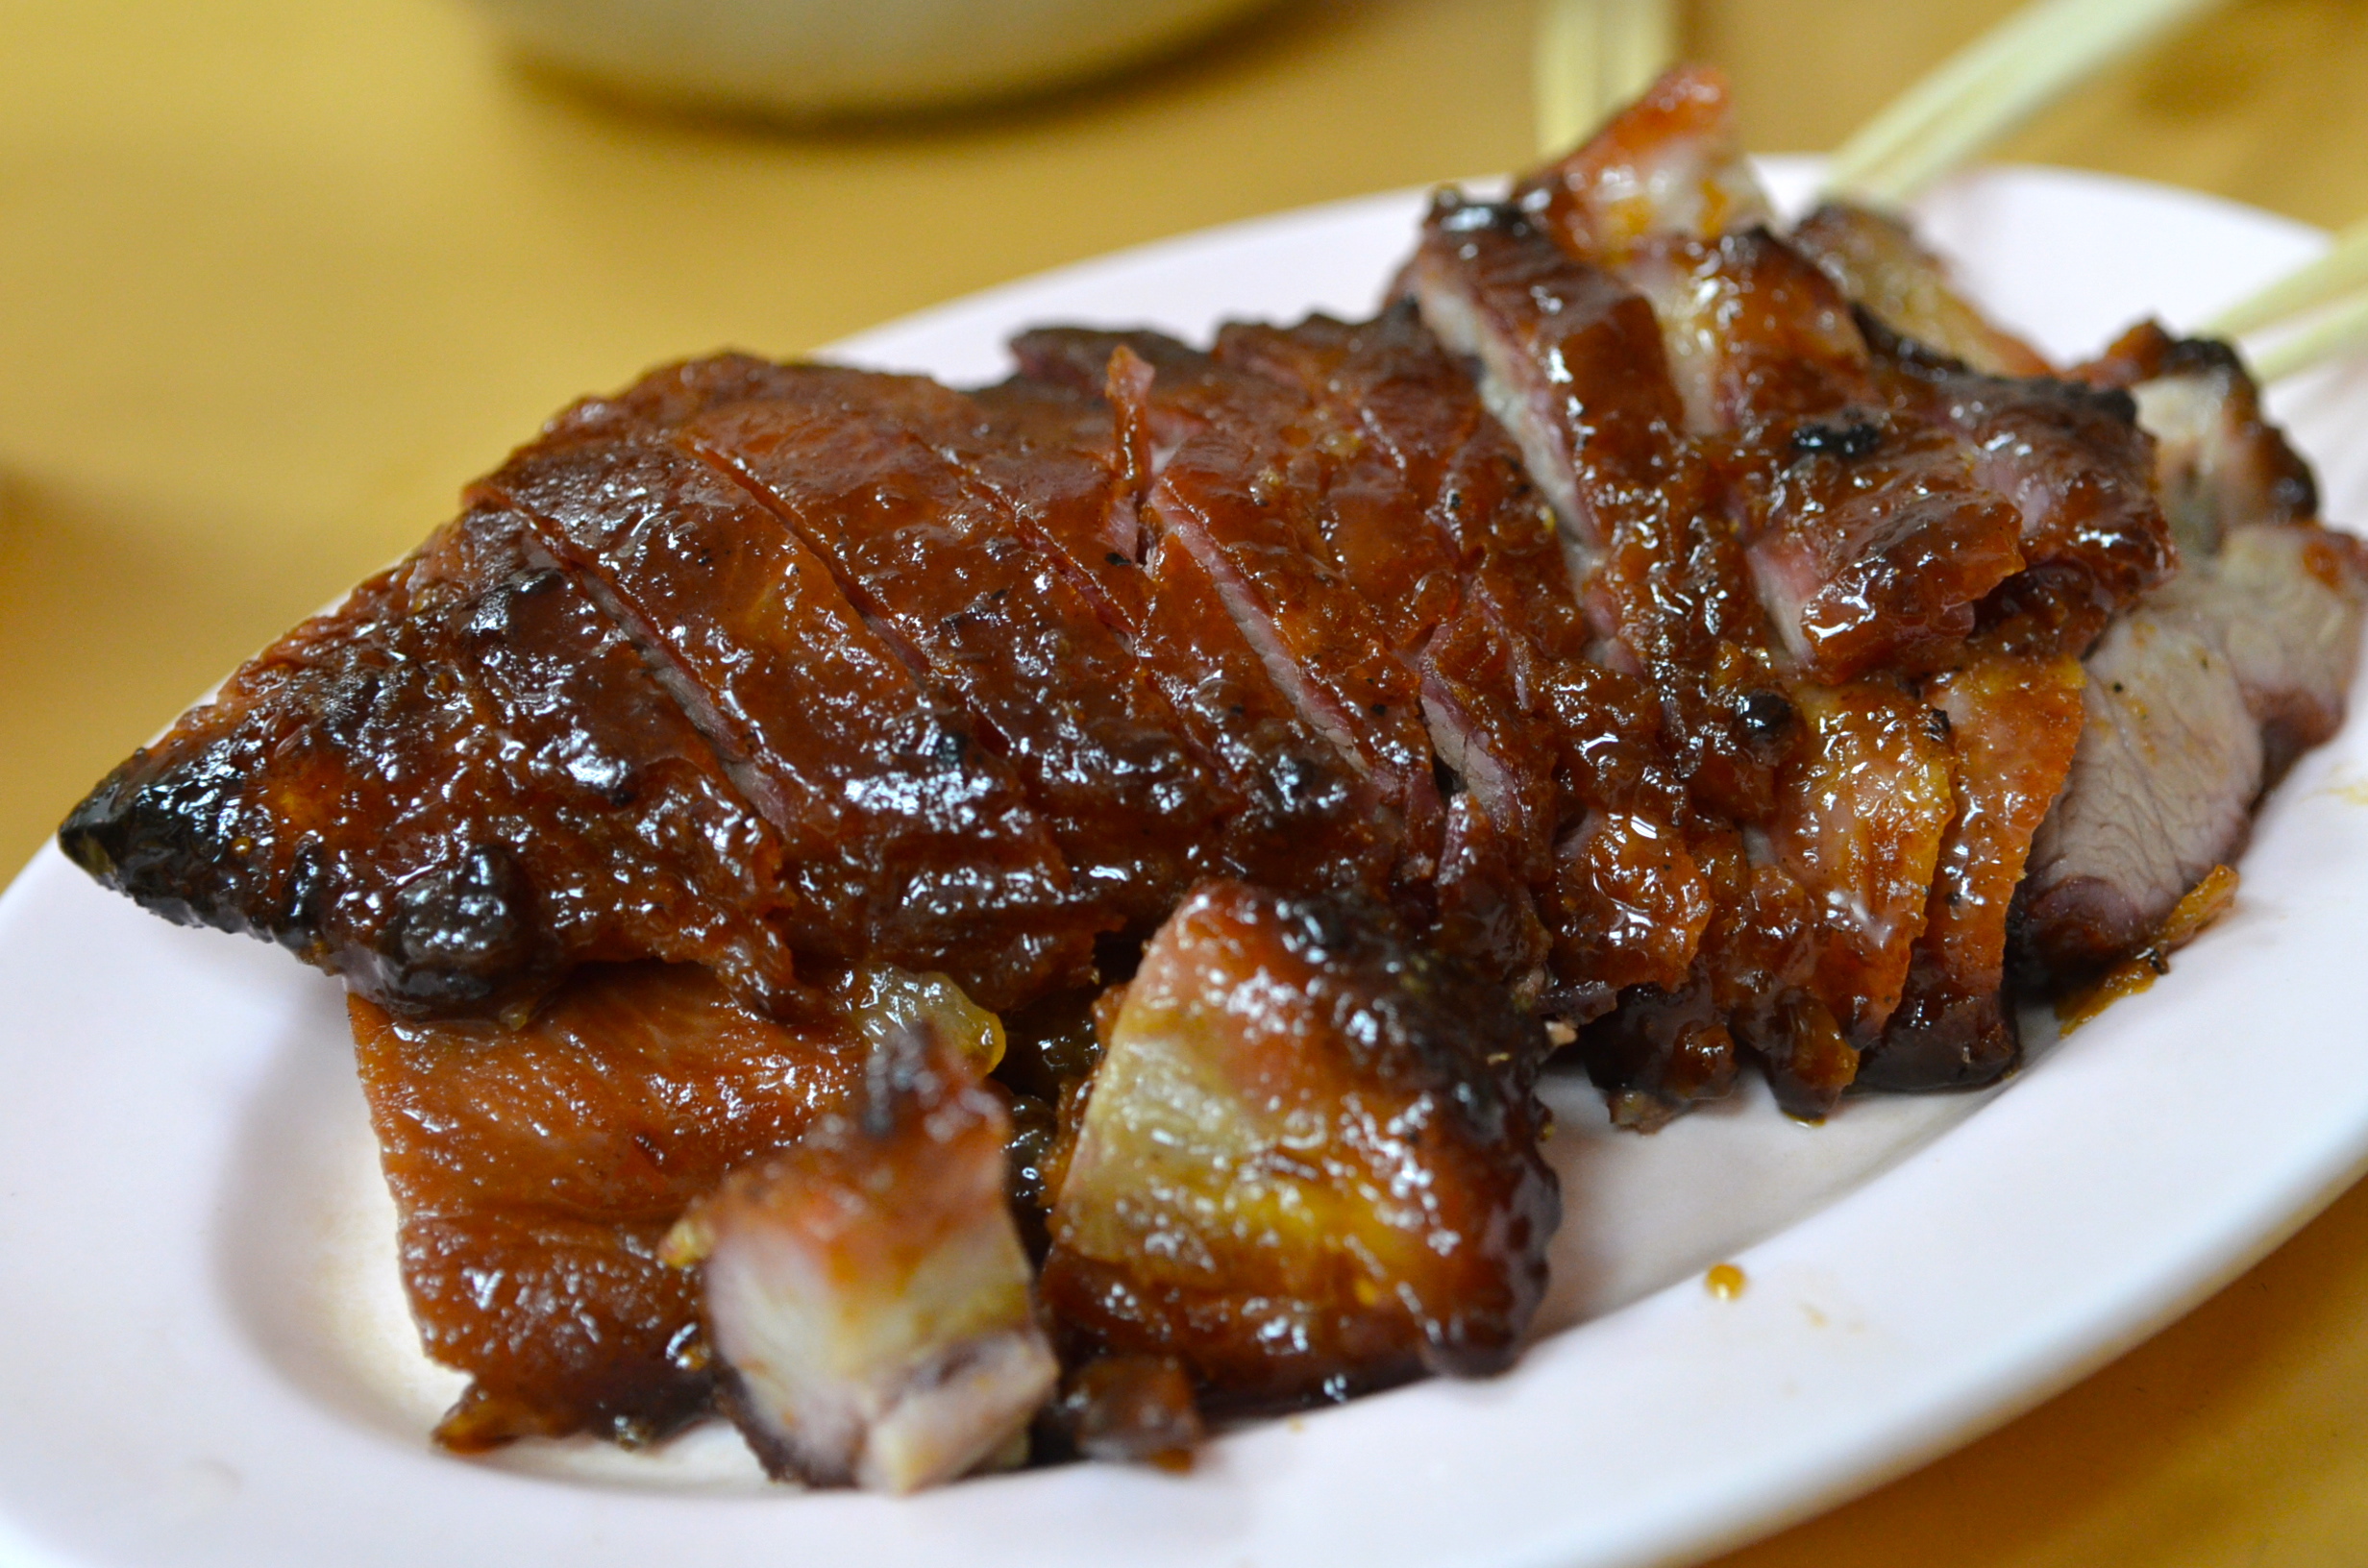 joy hing roasted meat | The Eatvidence Trails